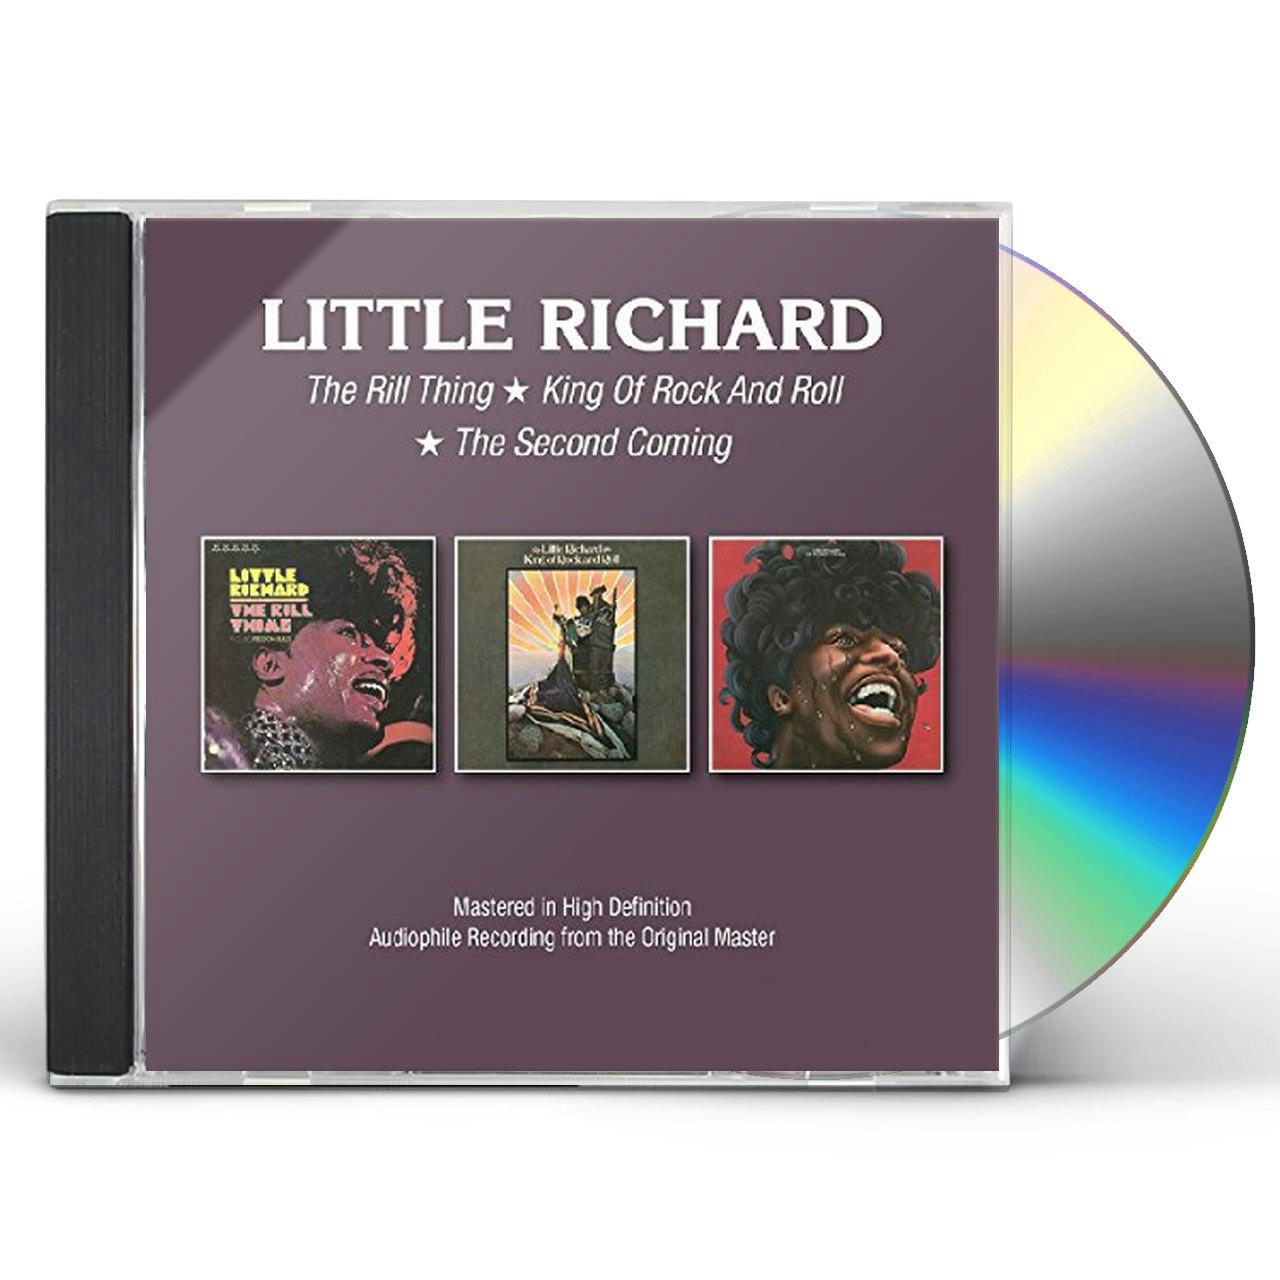 Little Richard THRILL THING/KING OF ROCK  ROLL/SECOND COMING CD